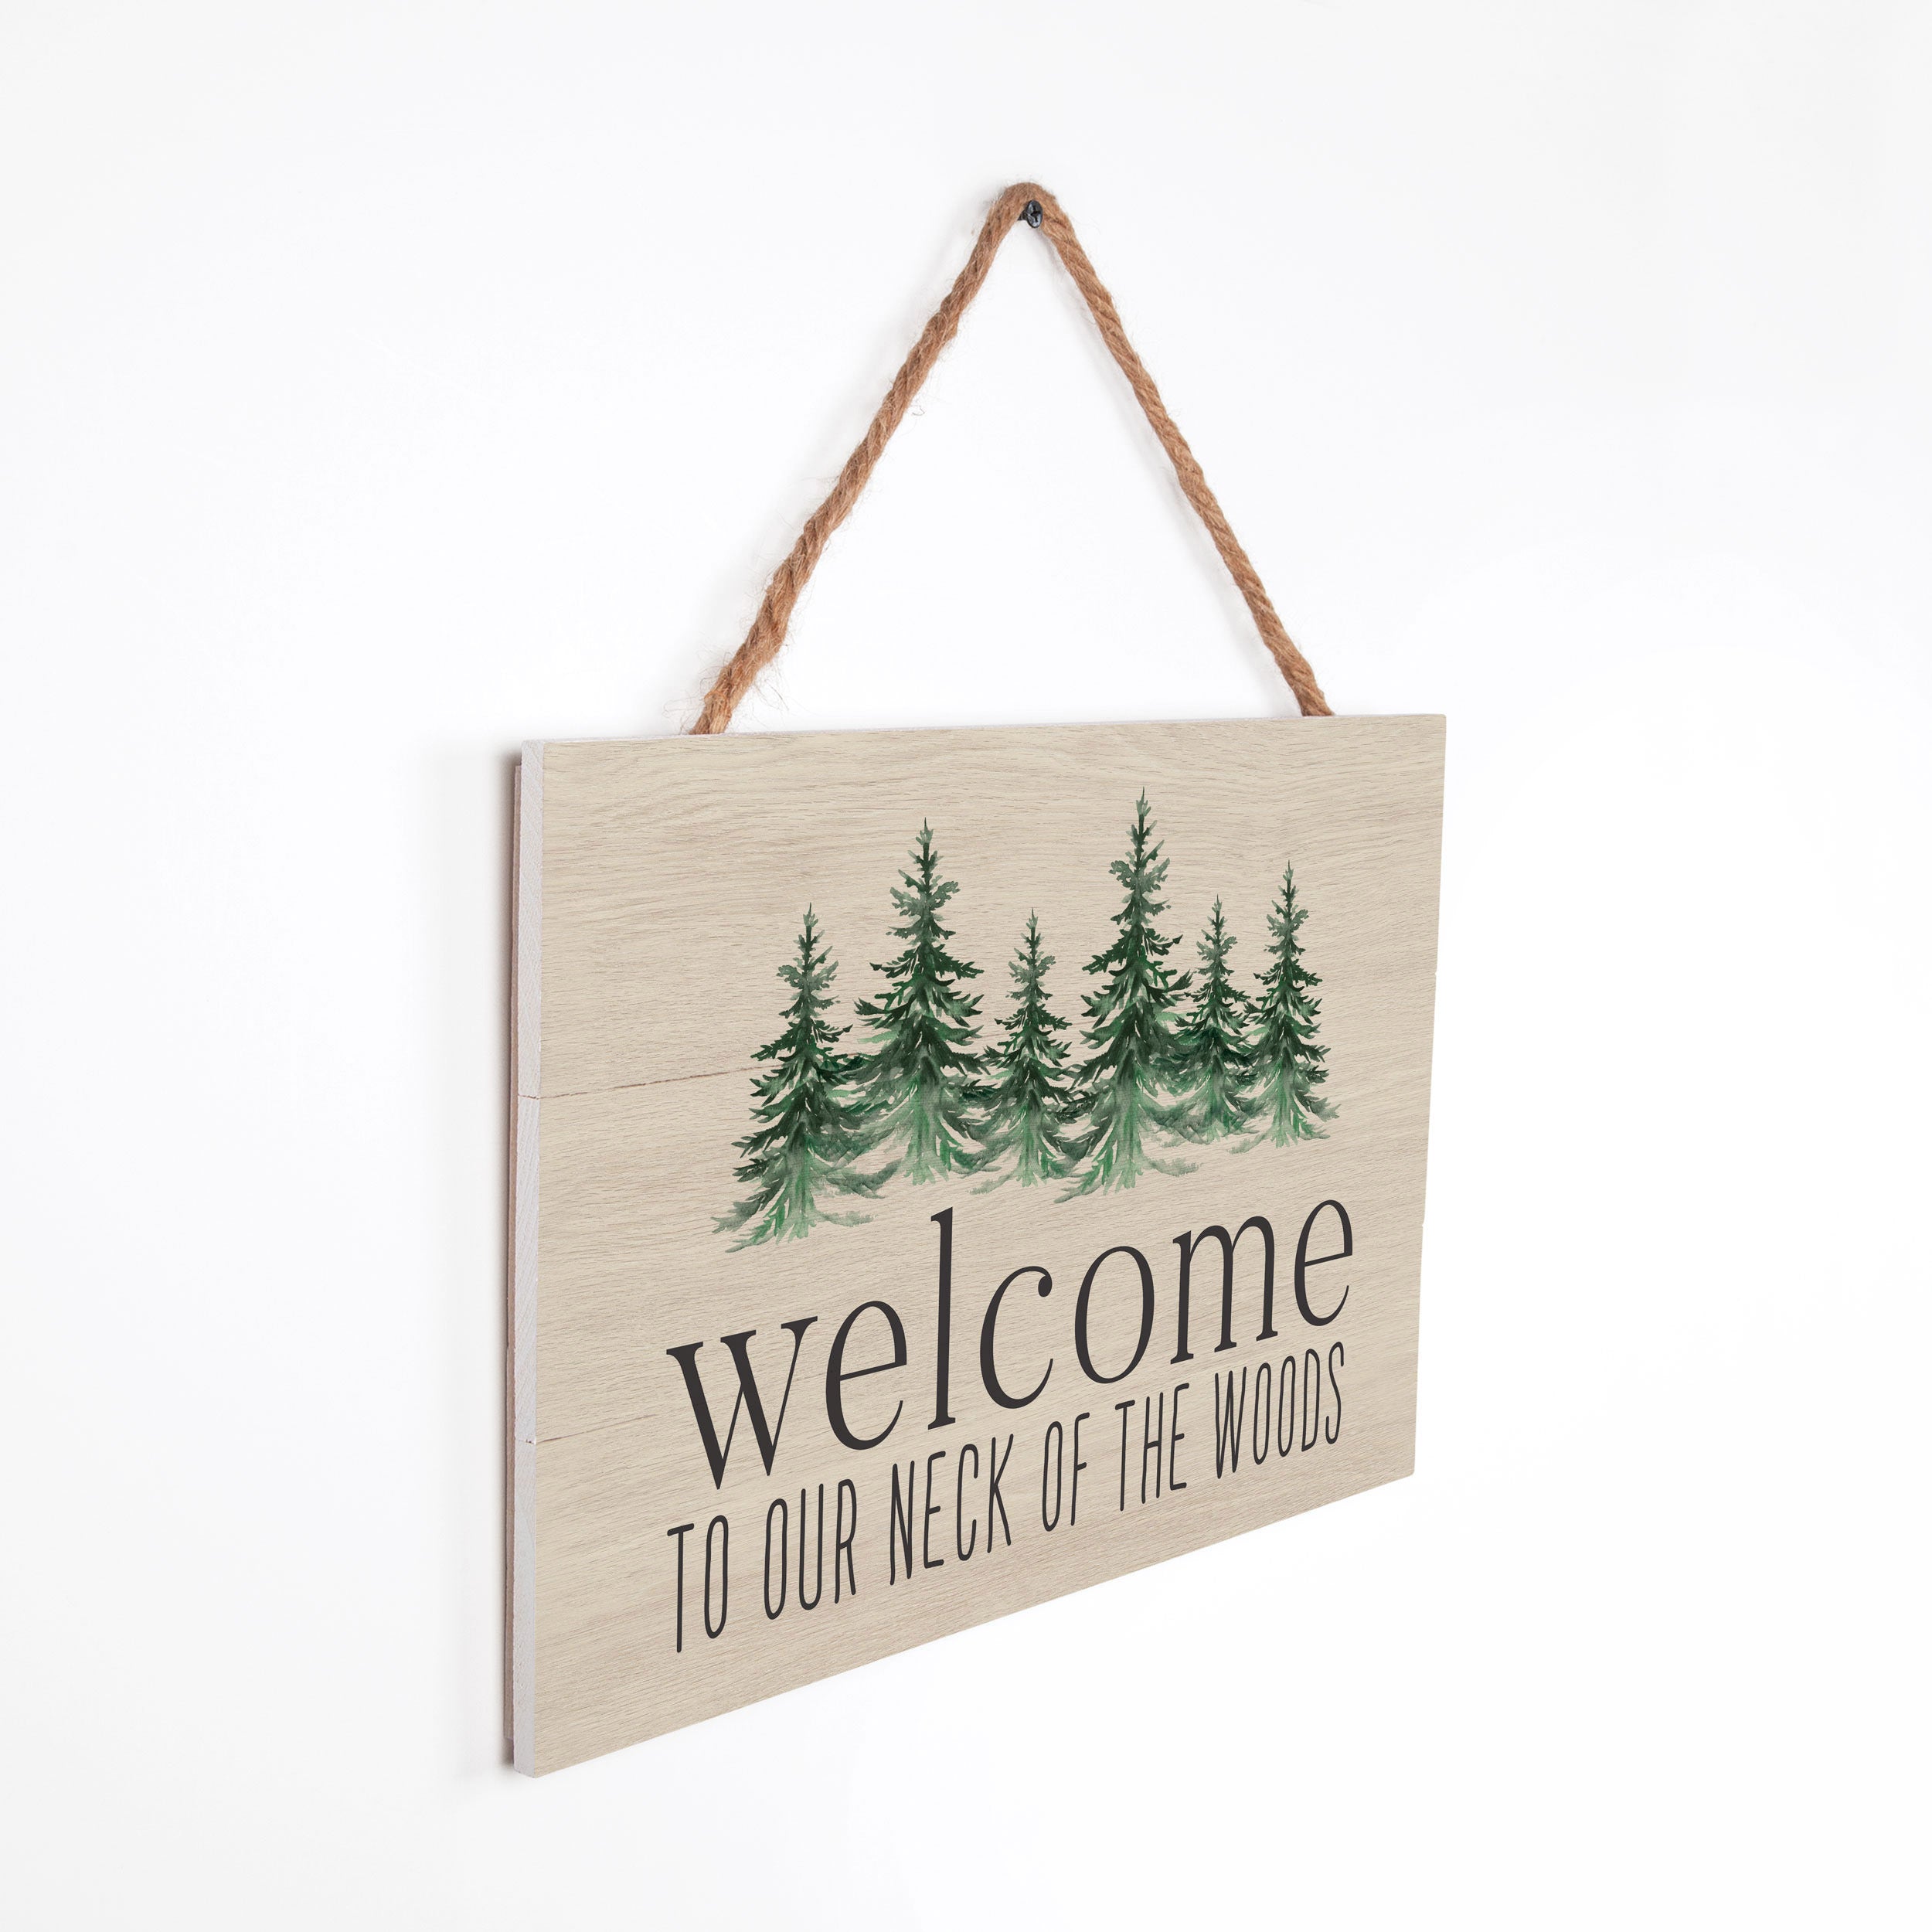 Welcome To Our Neck Of The Woods Outdoor Hanging Sign